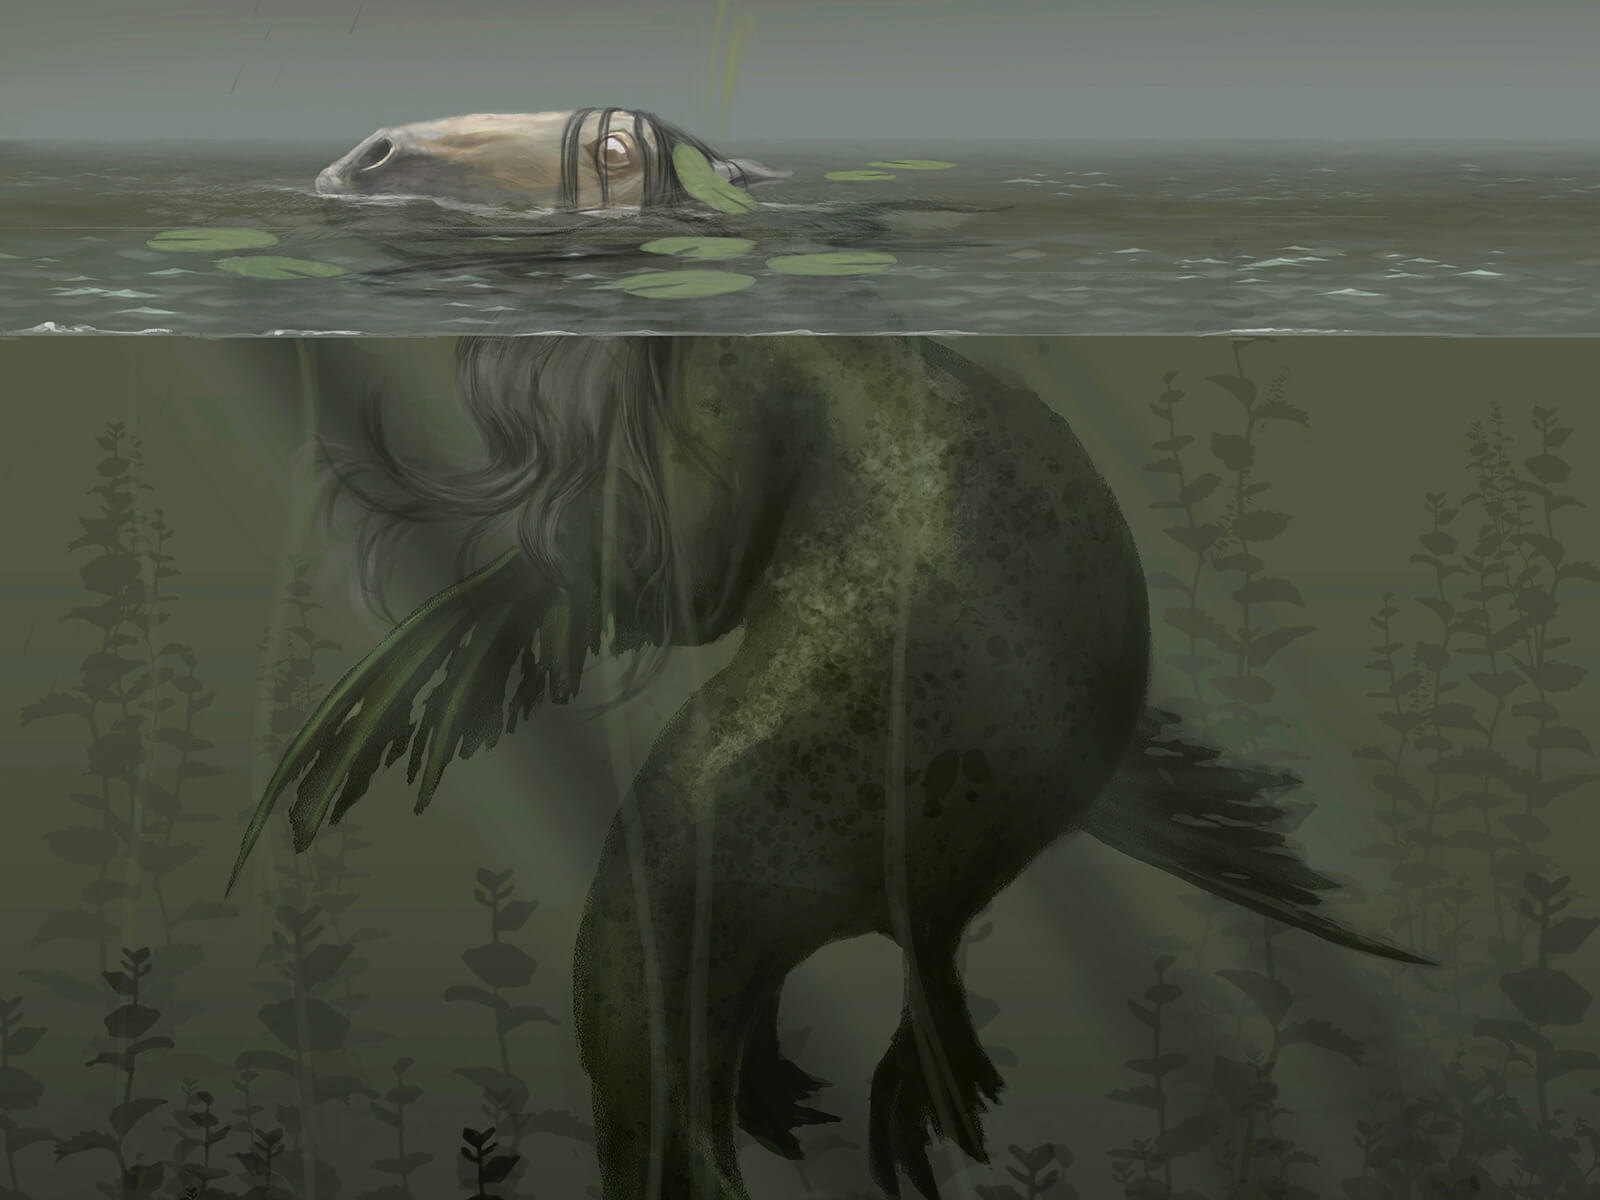 What appears to be a horse&#039;s head pokes above the surface of a lake, but a green sea-slug like creature actually lurks below.